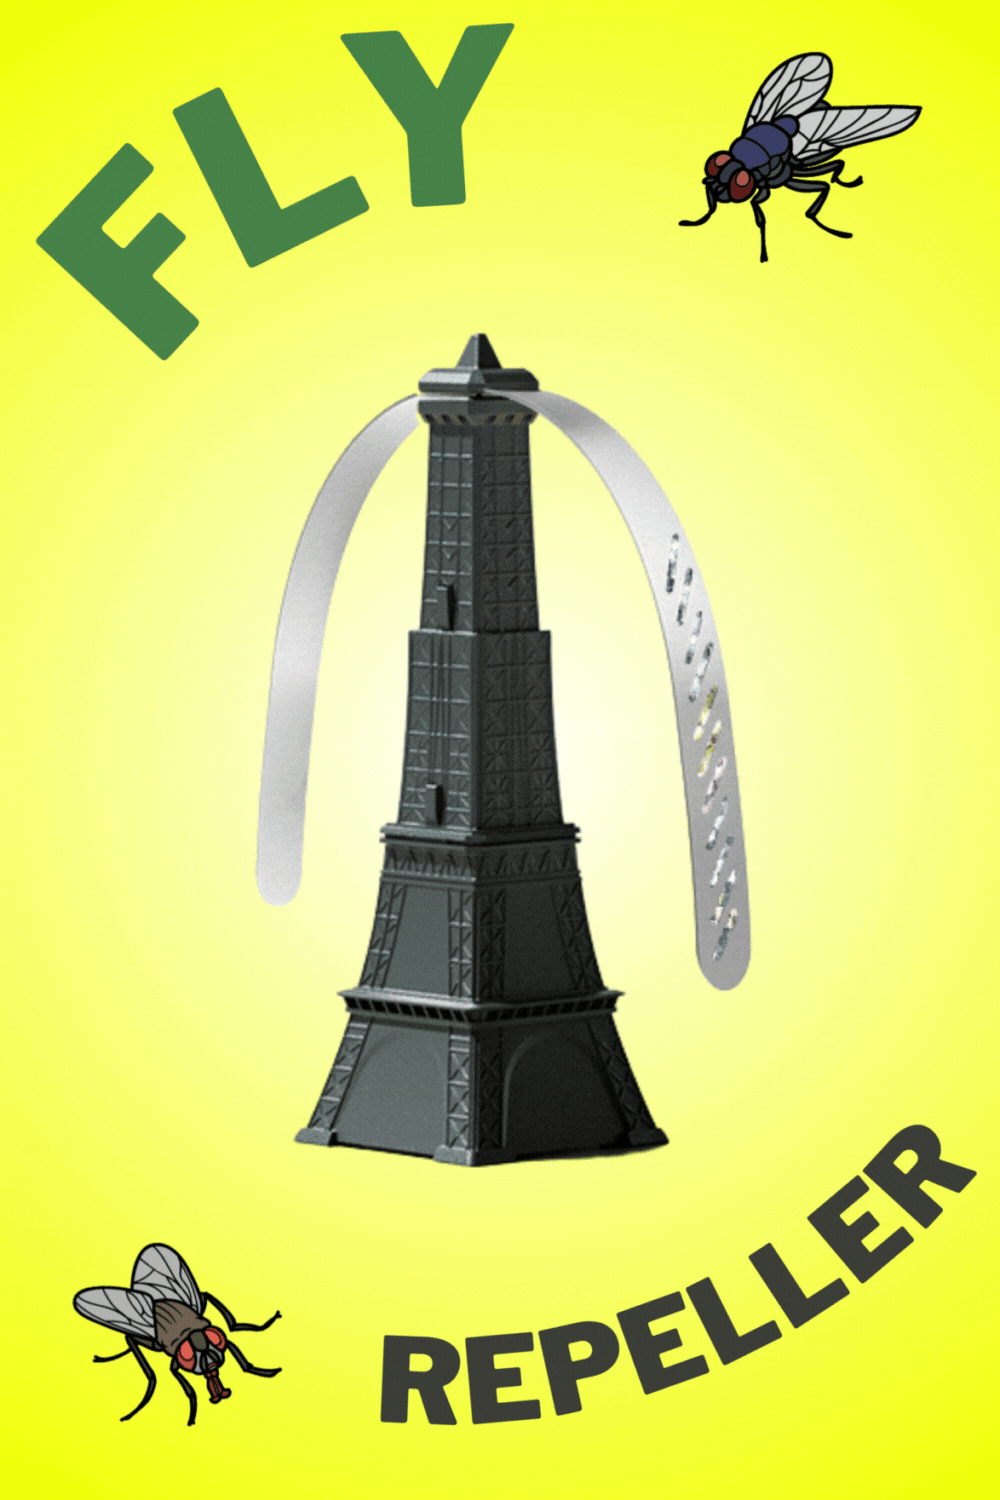 Eiffel Tower Retractable Fly Fan Repellent Keeps Flies and Bugs Off Your Food